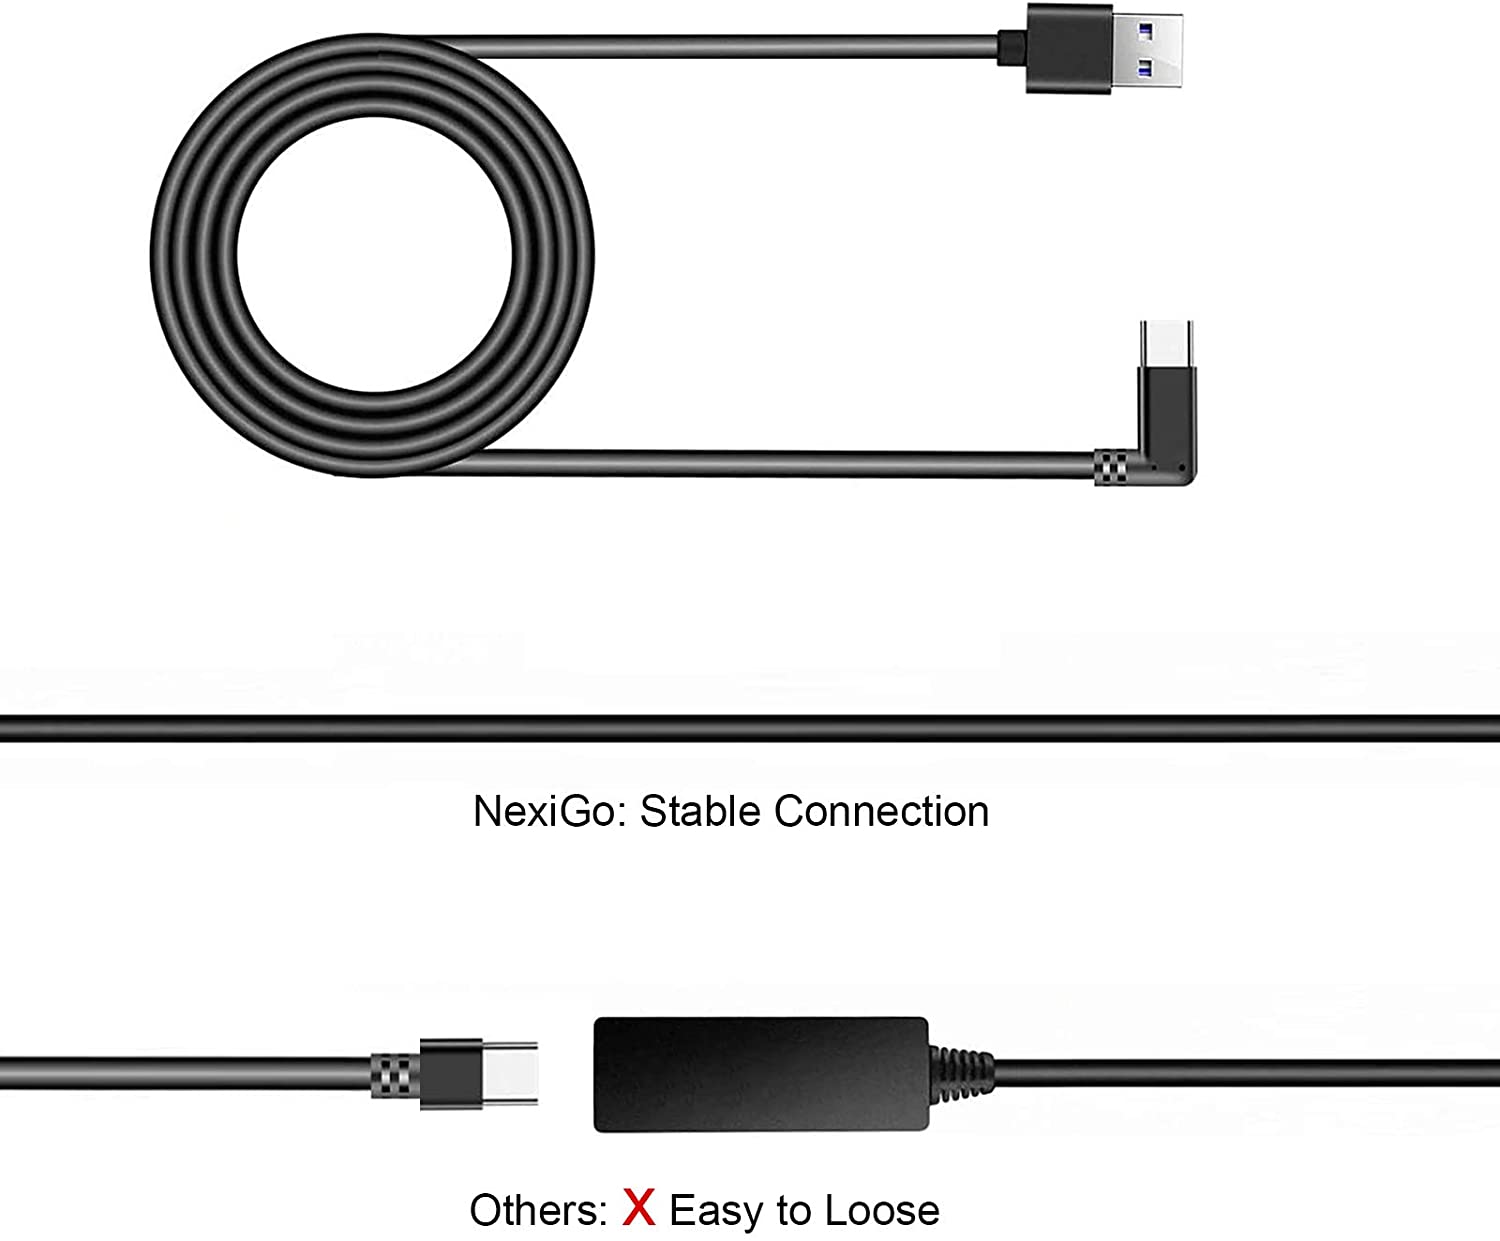 NexiGo cable with 90° connector for more stable and secure connections compared to other cables.